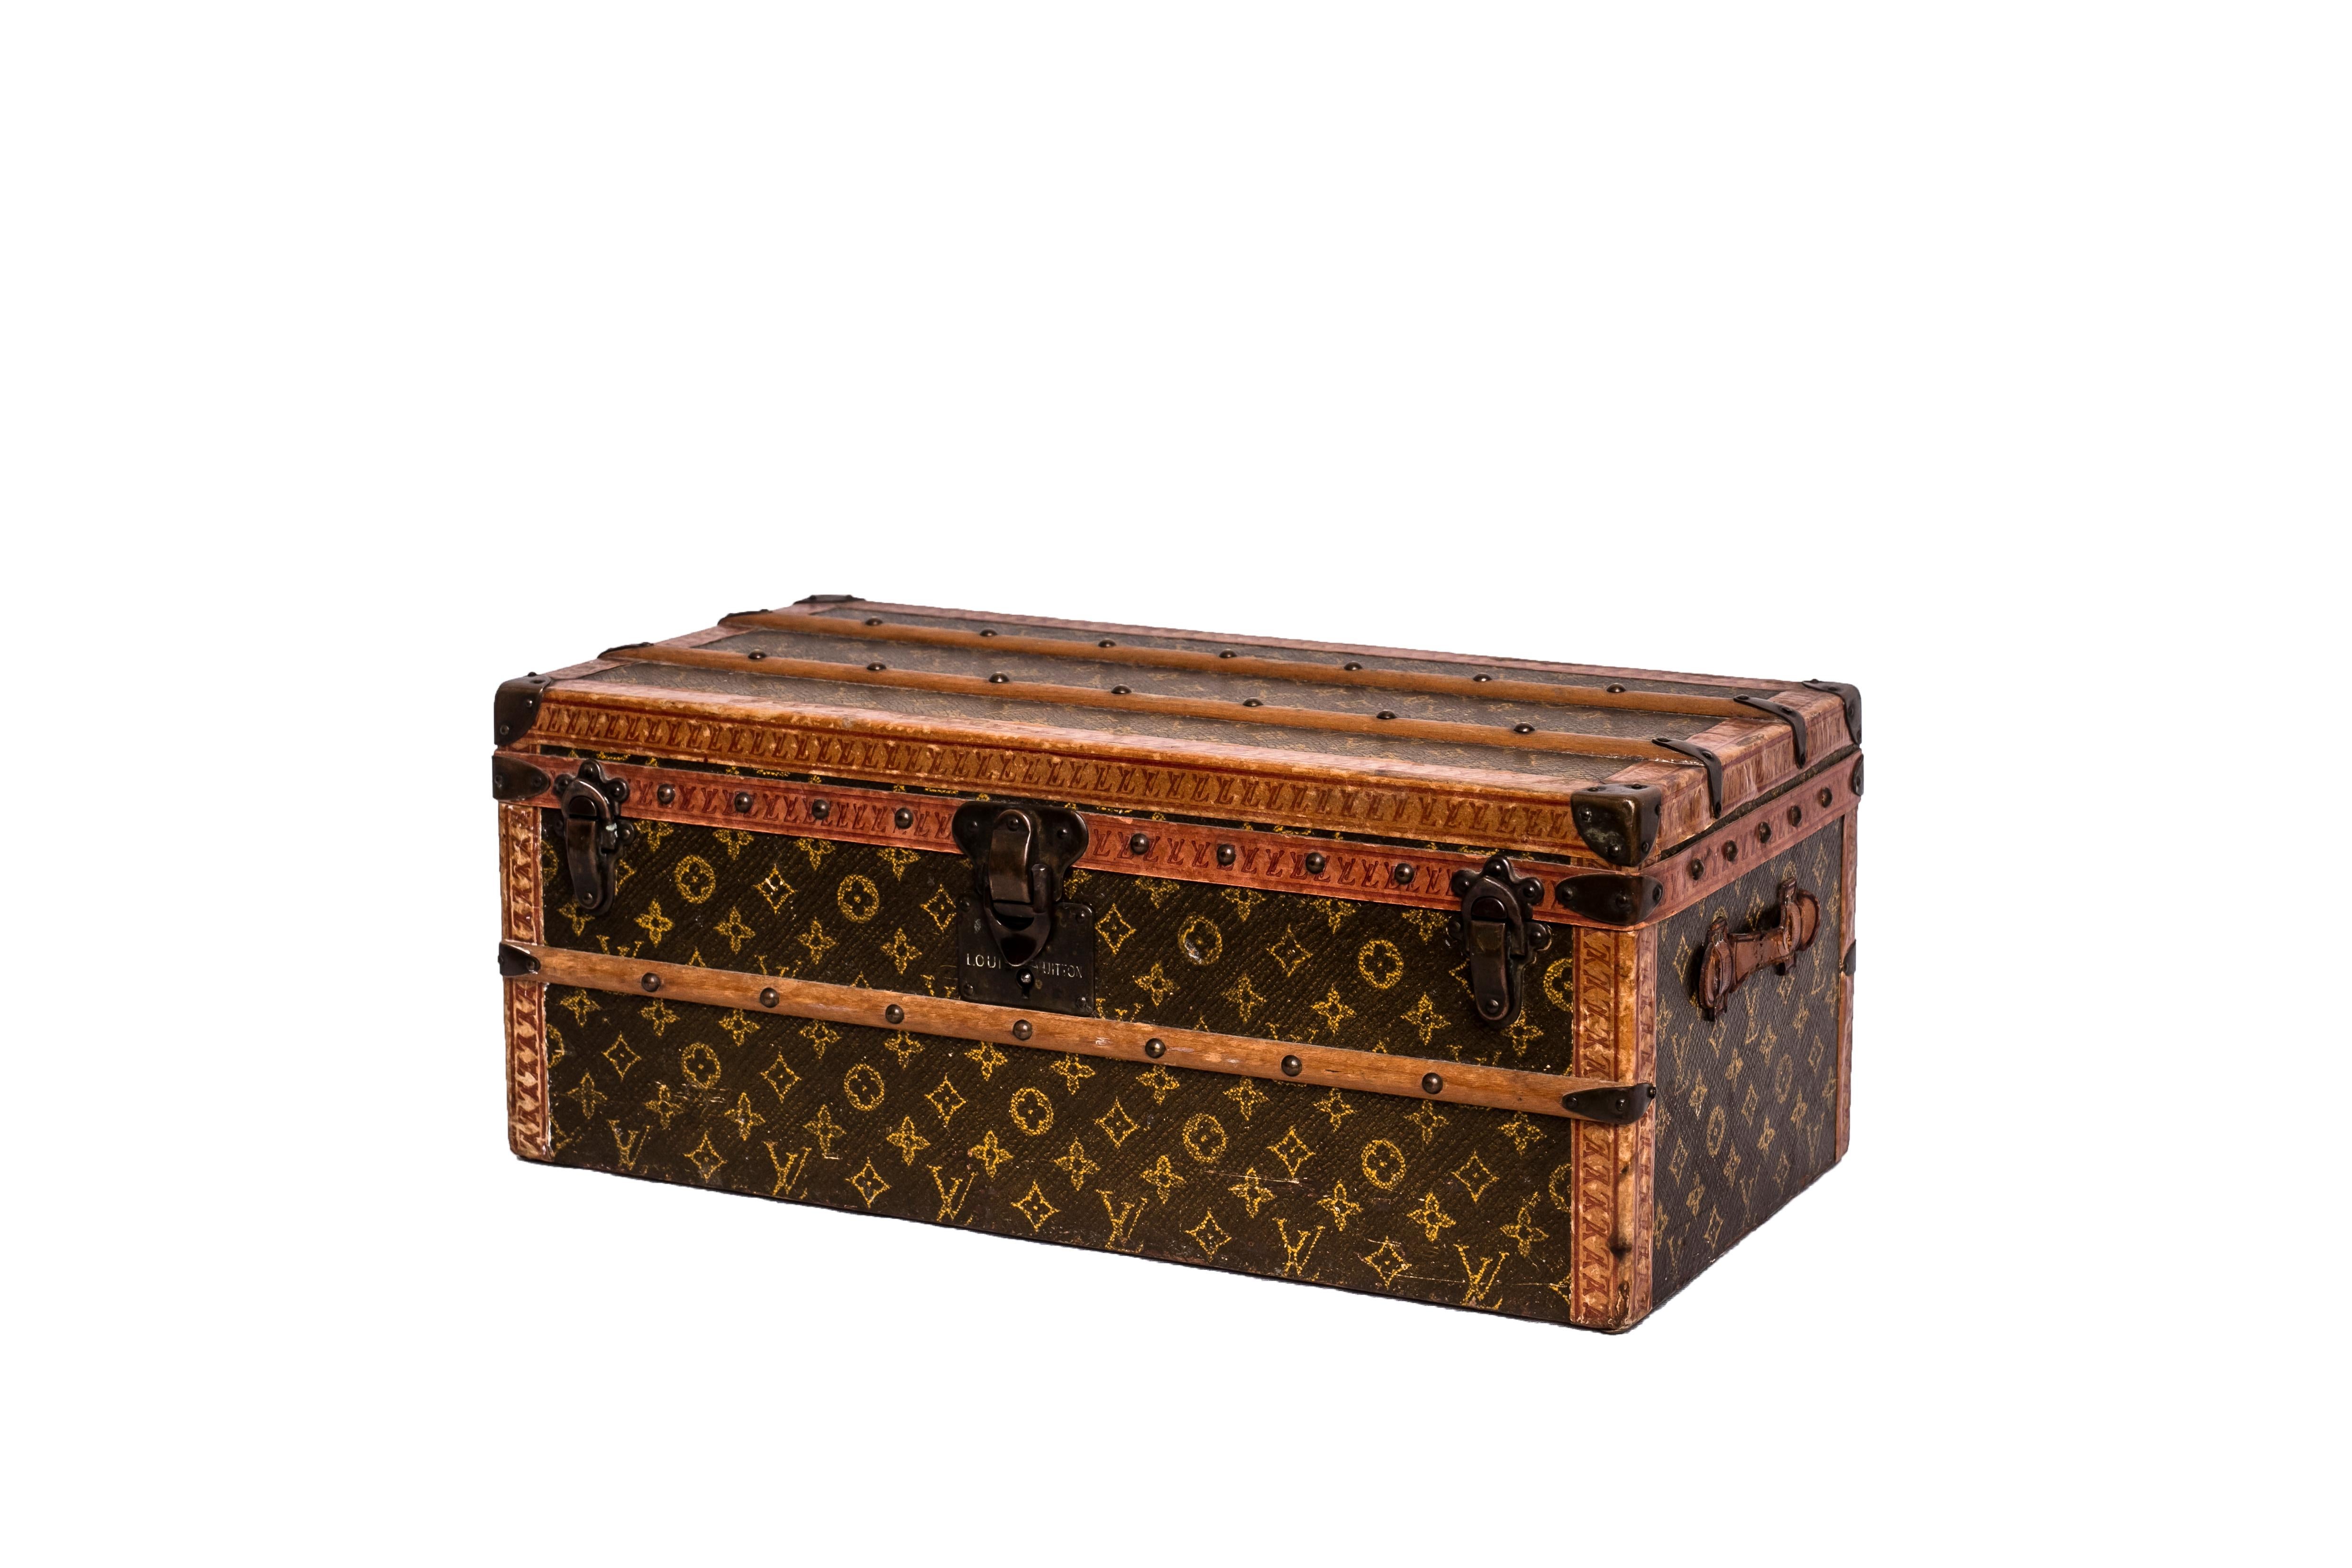 Very rare 1910s Louis Vuitton flower trunk “Malle Fleurs”, in the shape of a courier trunk but miniature, covered of the Louis Vuitton Monogram, leather side handles, wooden slats and brass hardware.

The Interior is a mix of Golden